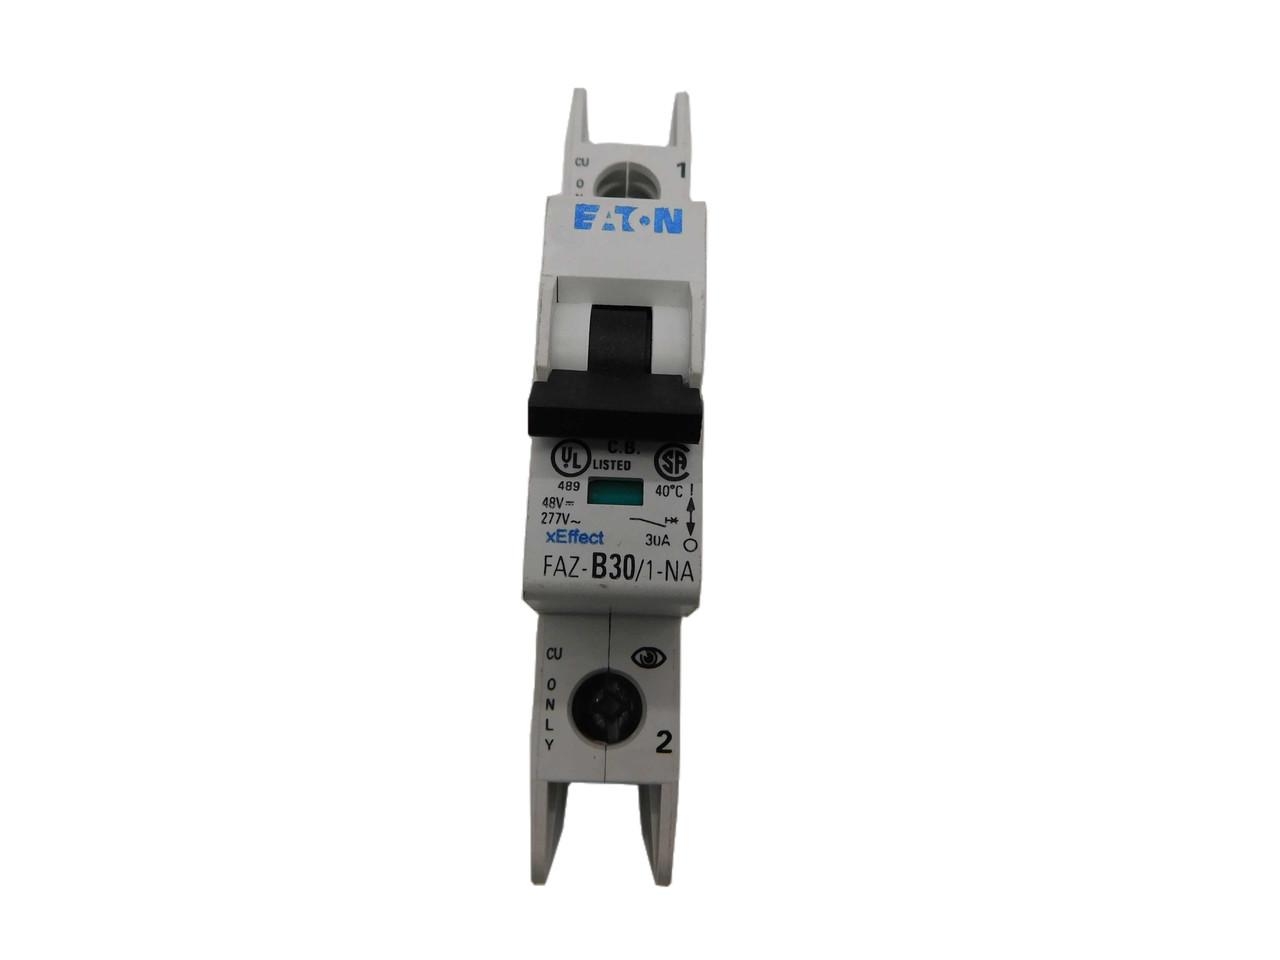 Eaton FAZ-B30/1-NA 277/480 VAC 50/60 Hz, 30 A, 1-Pole, 10/14 kA, 3 to 5 x Rated Current, Screw Terminal, DIN Rail Mount, Standard Packaging, B-Curve, Current Limiting, Thermal Magnetic